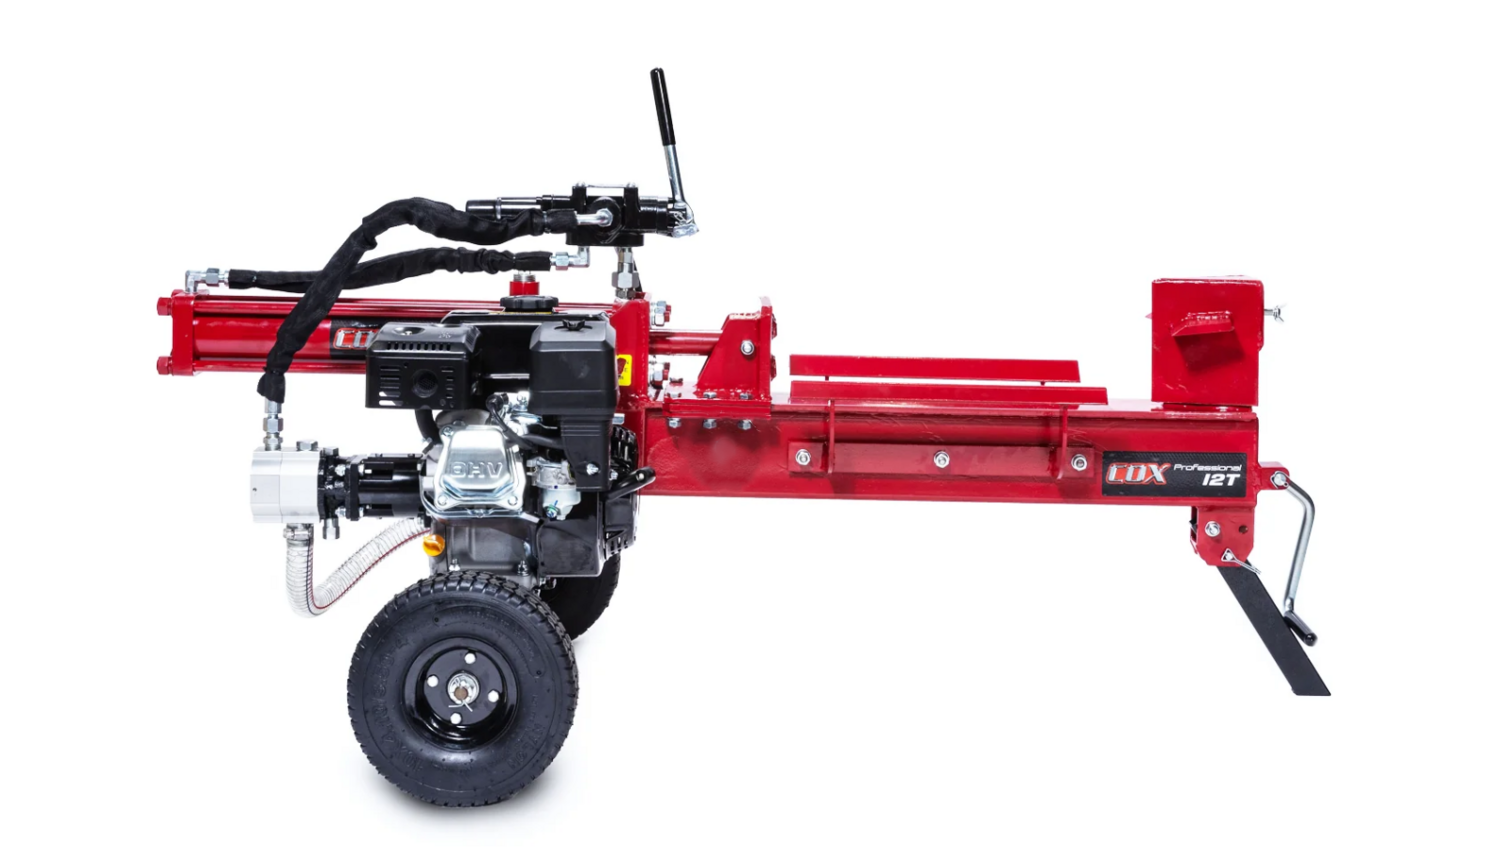 Cox Professional 12 Ton Petrol Powered Hydraulic Log Splitter with an 8.6 second cycle time